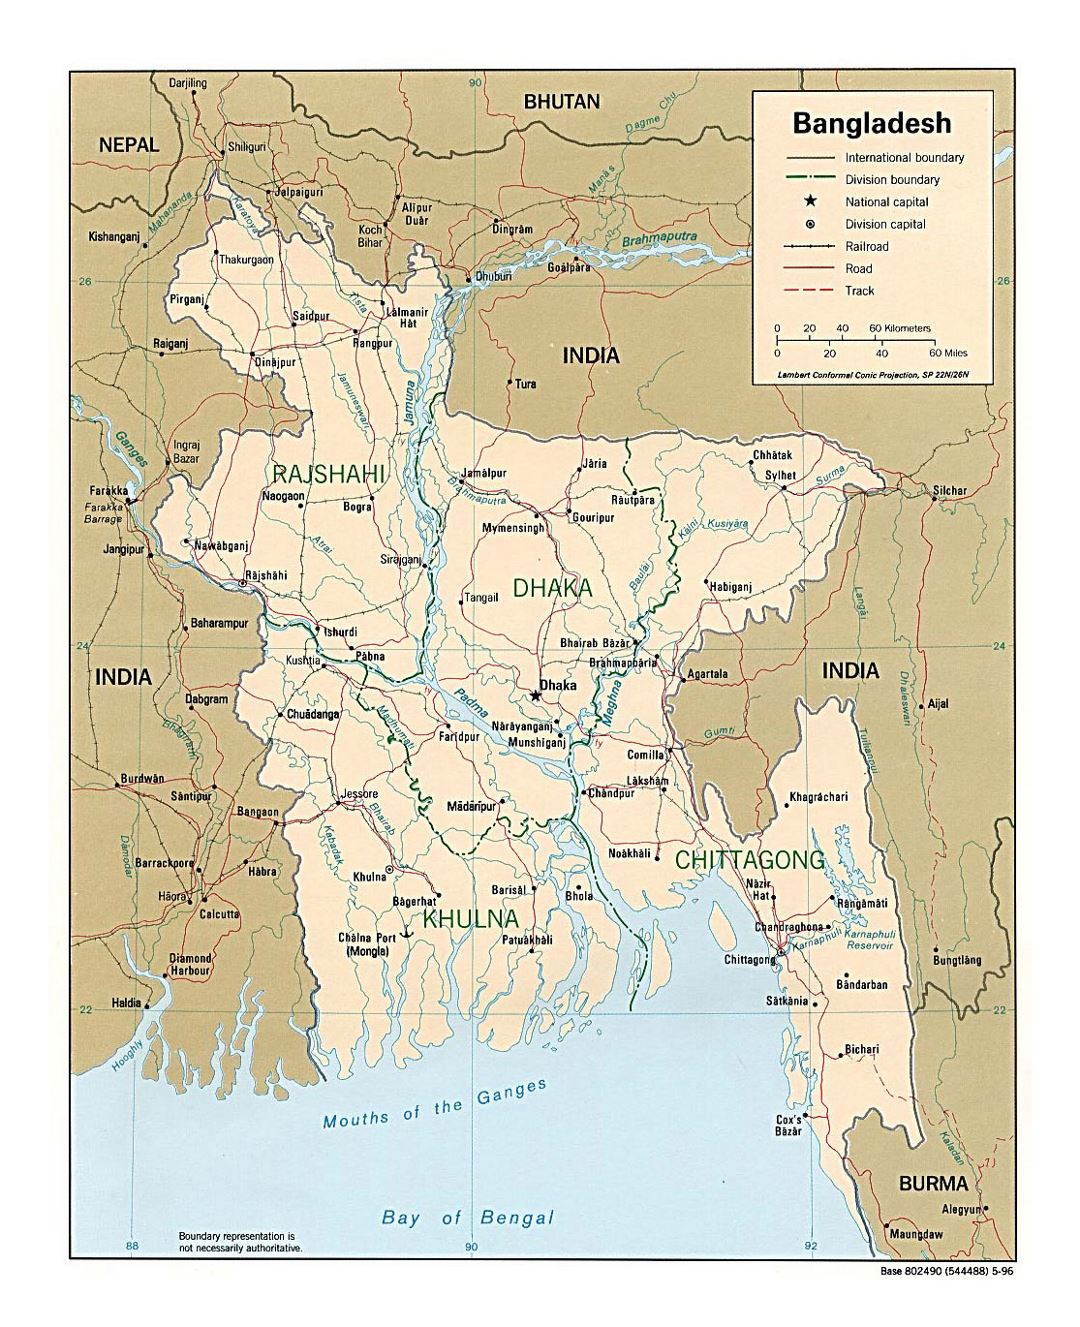 Detailed political and administrative map of Bangladesh with roads and major cities - 1996